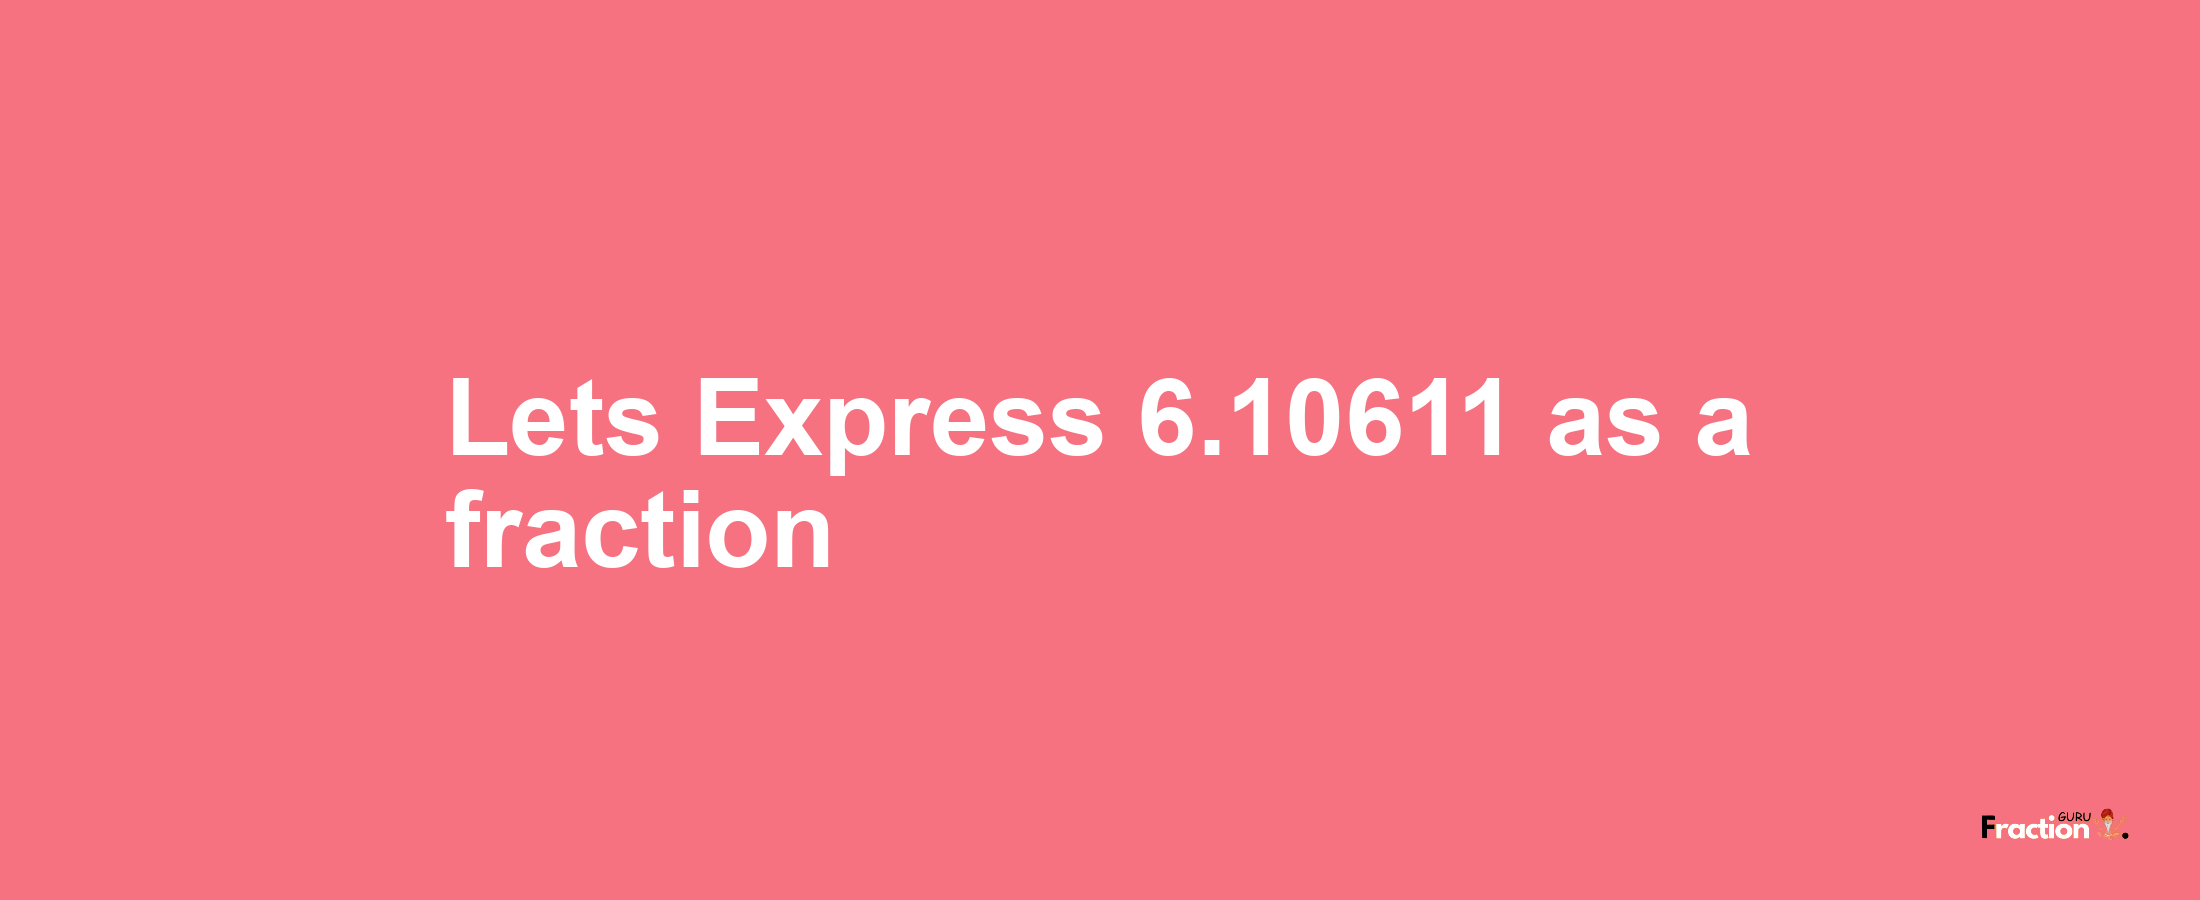 Lets Express 6.10611 as afraction